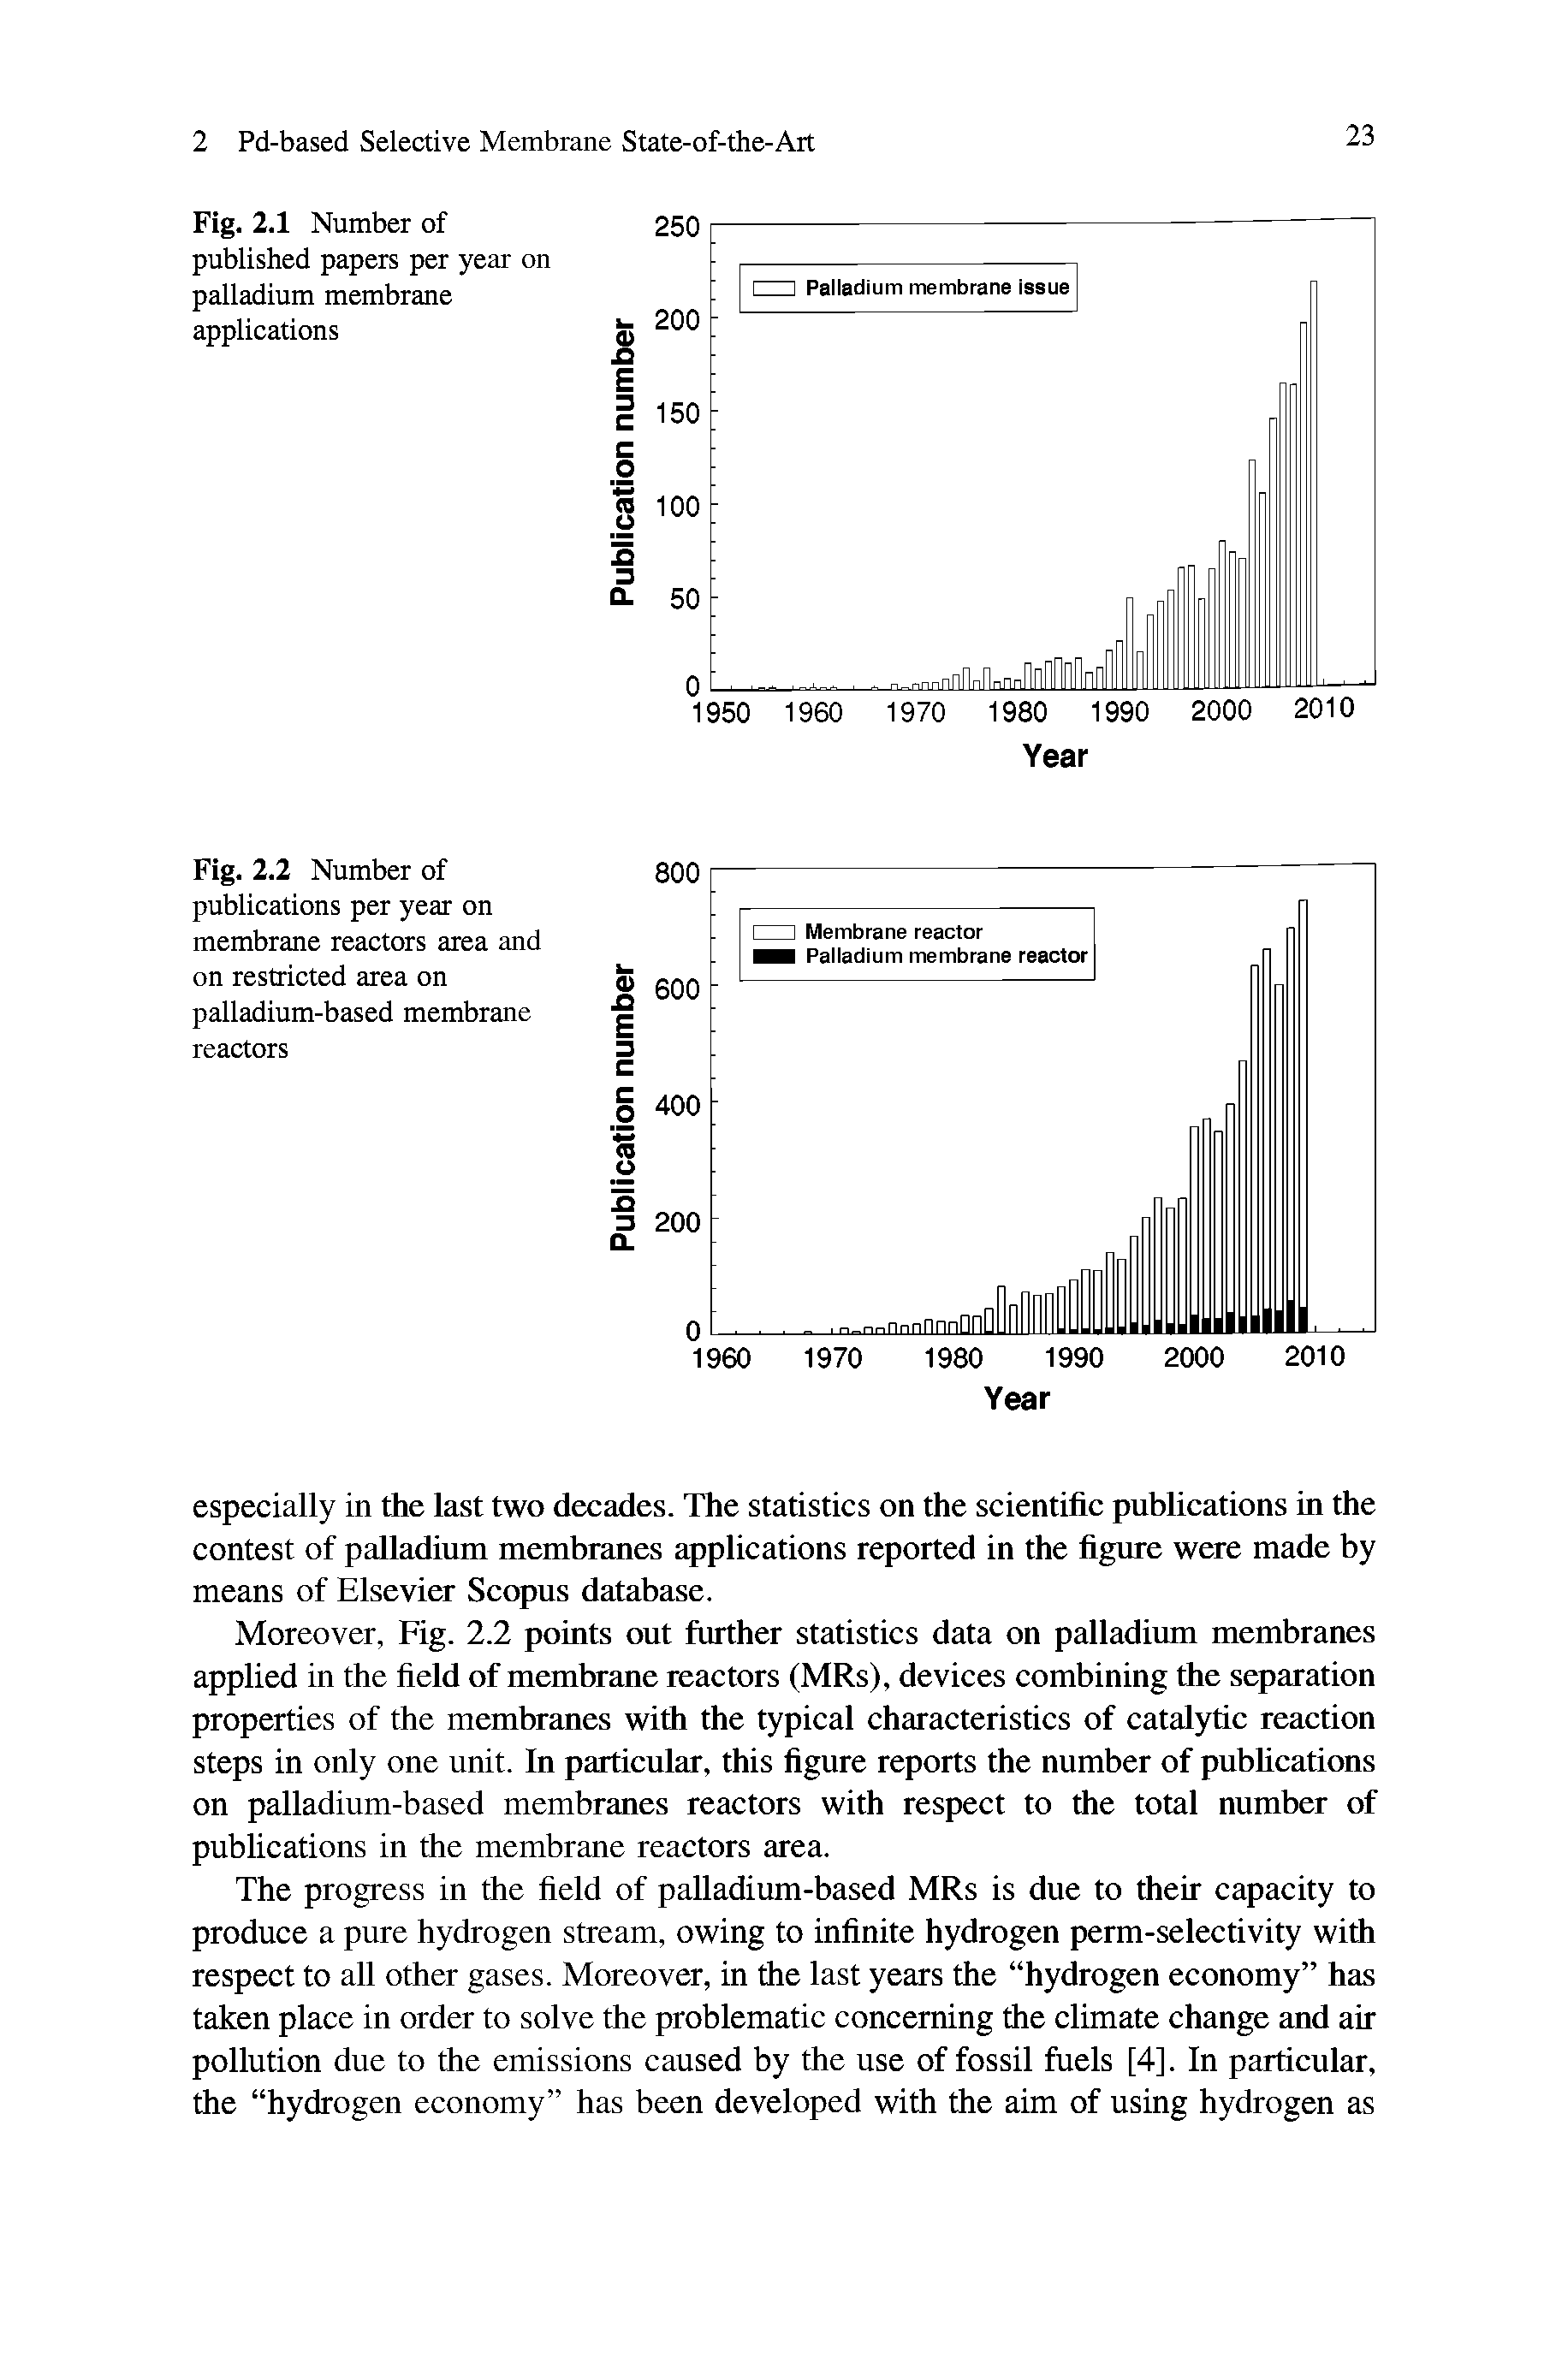 Fig. 2.2 Number of publications per year on membrane reactors area and on restricted area on palladium-based membrane reactors...